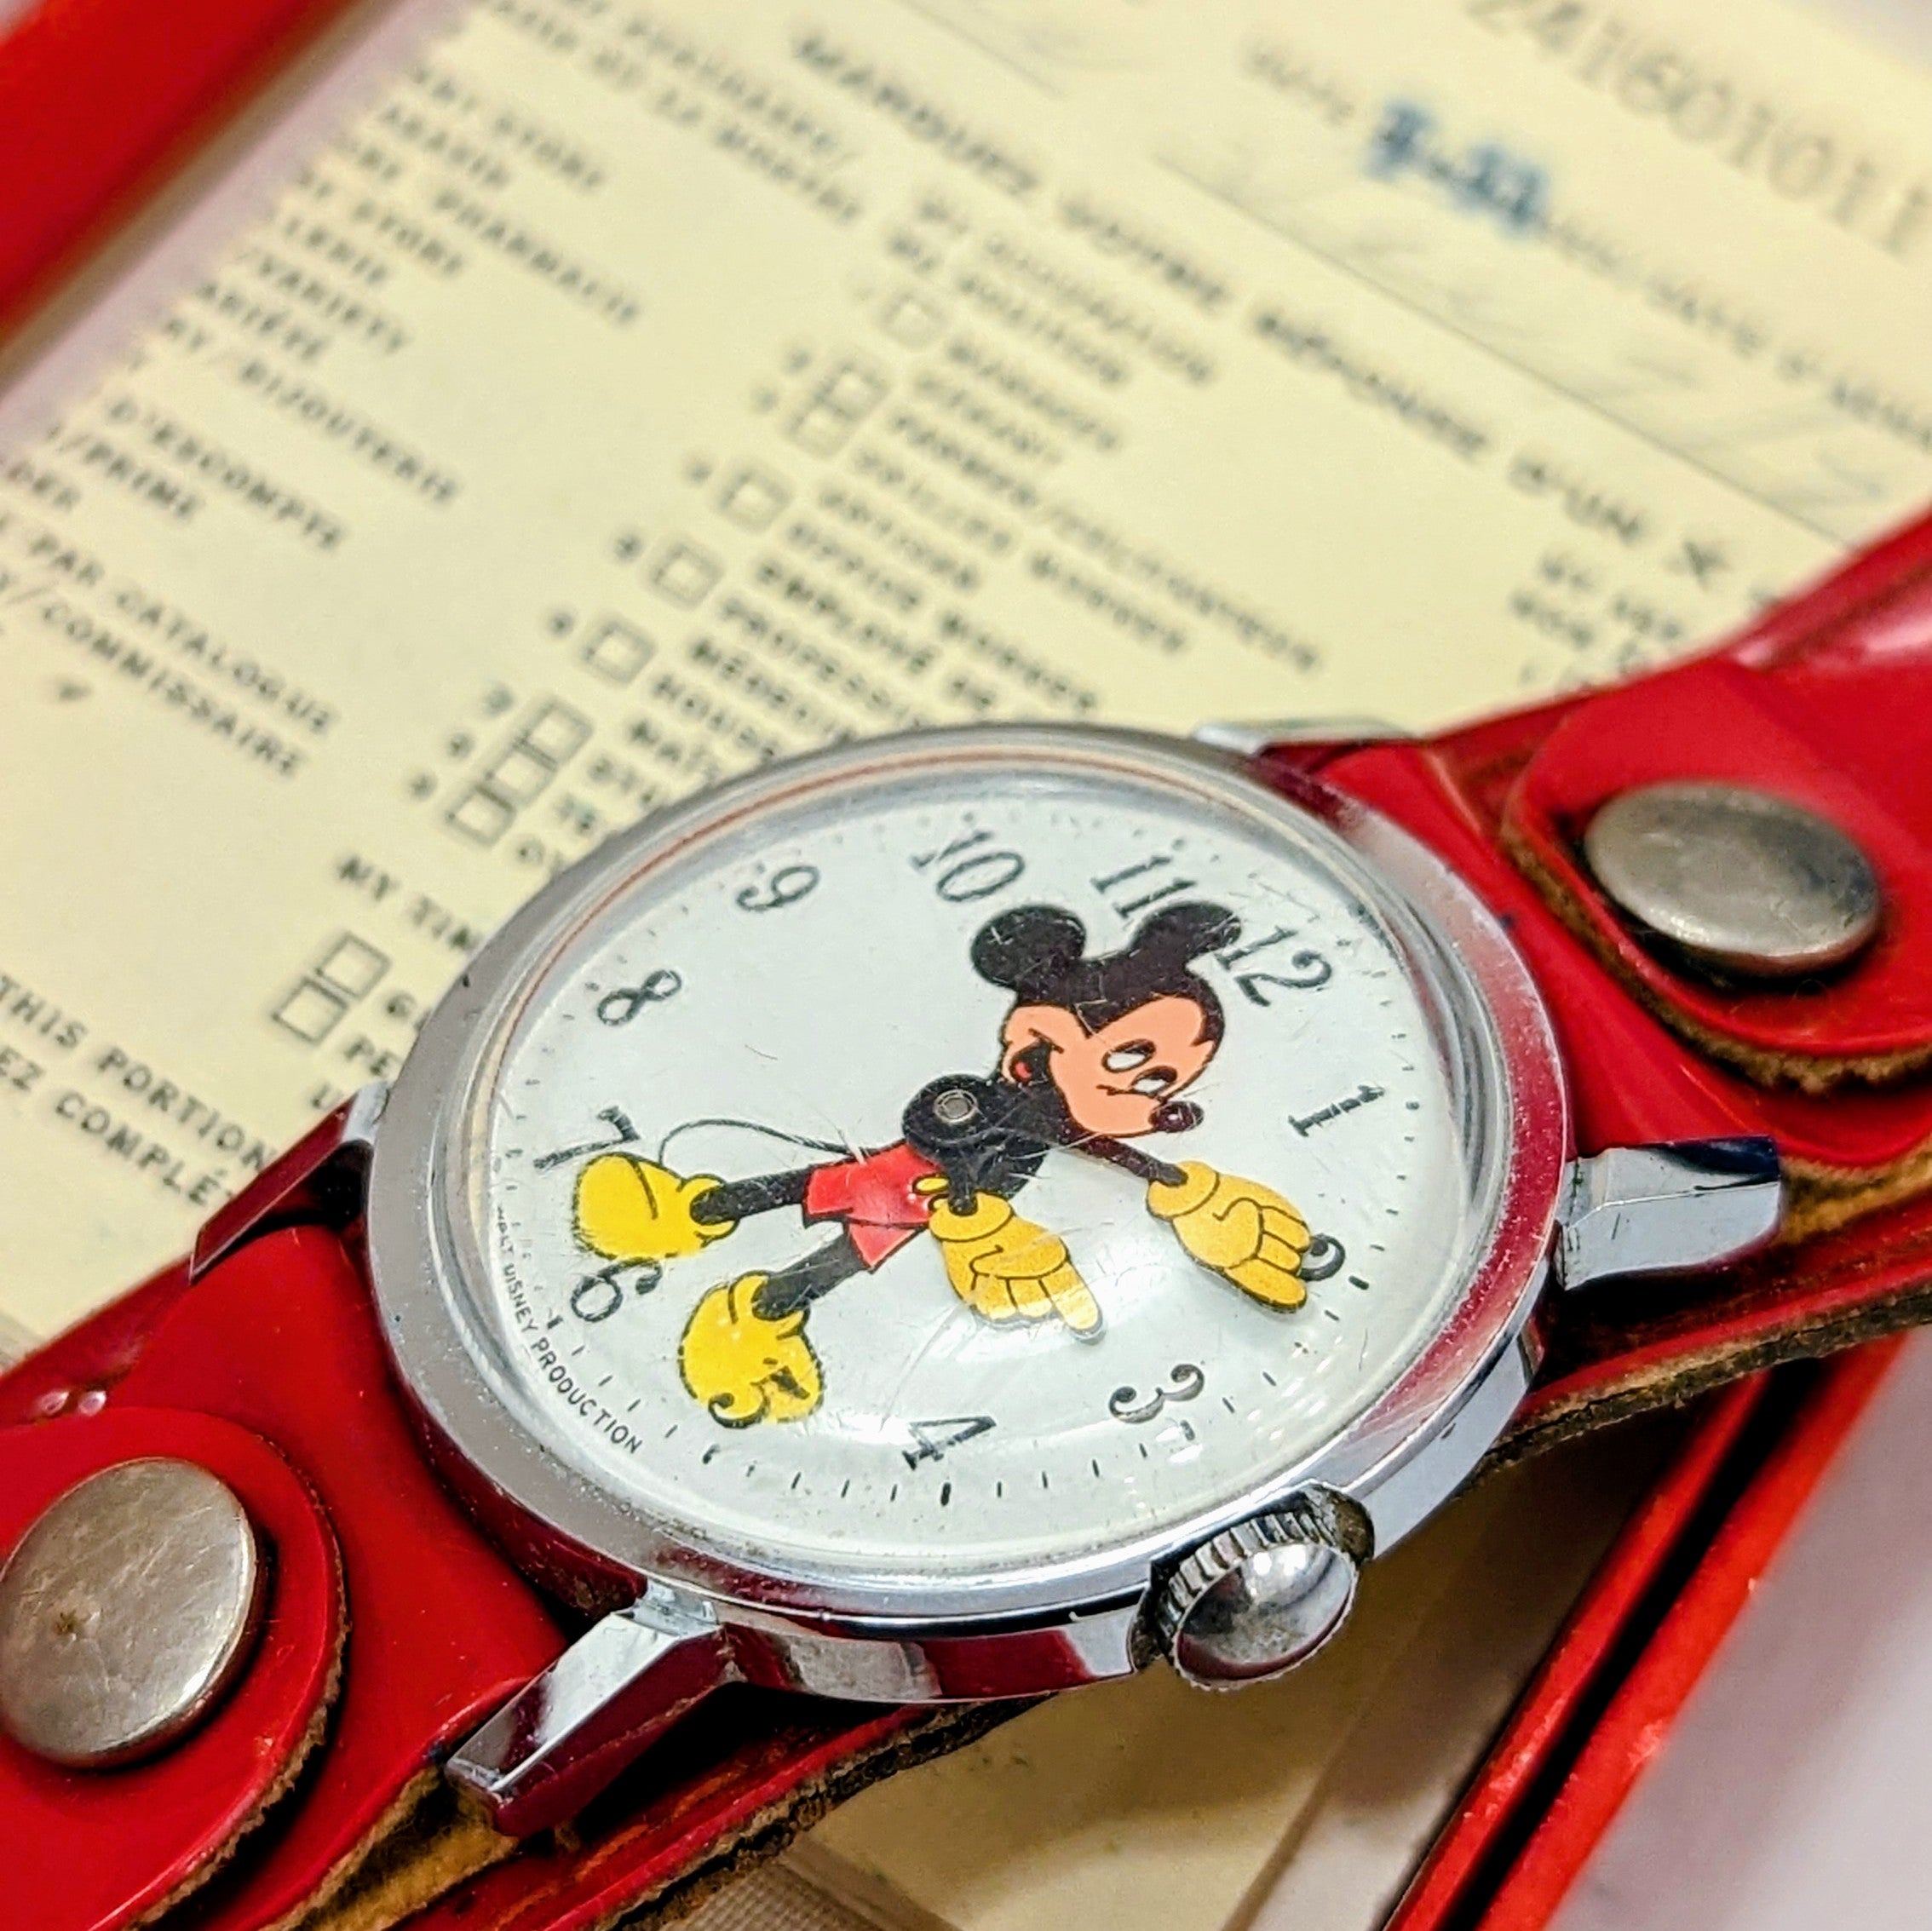 1971 INGERSOLL Mickey Mouse Watch Manual Wristwatch Original BOX! Animated Hands